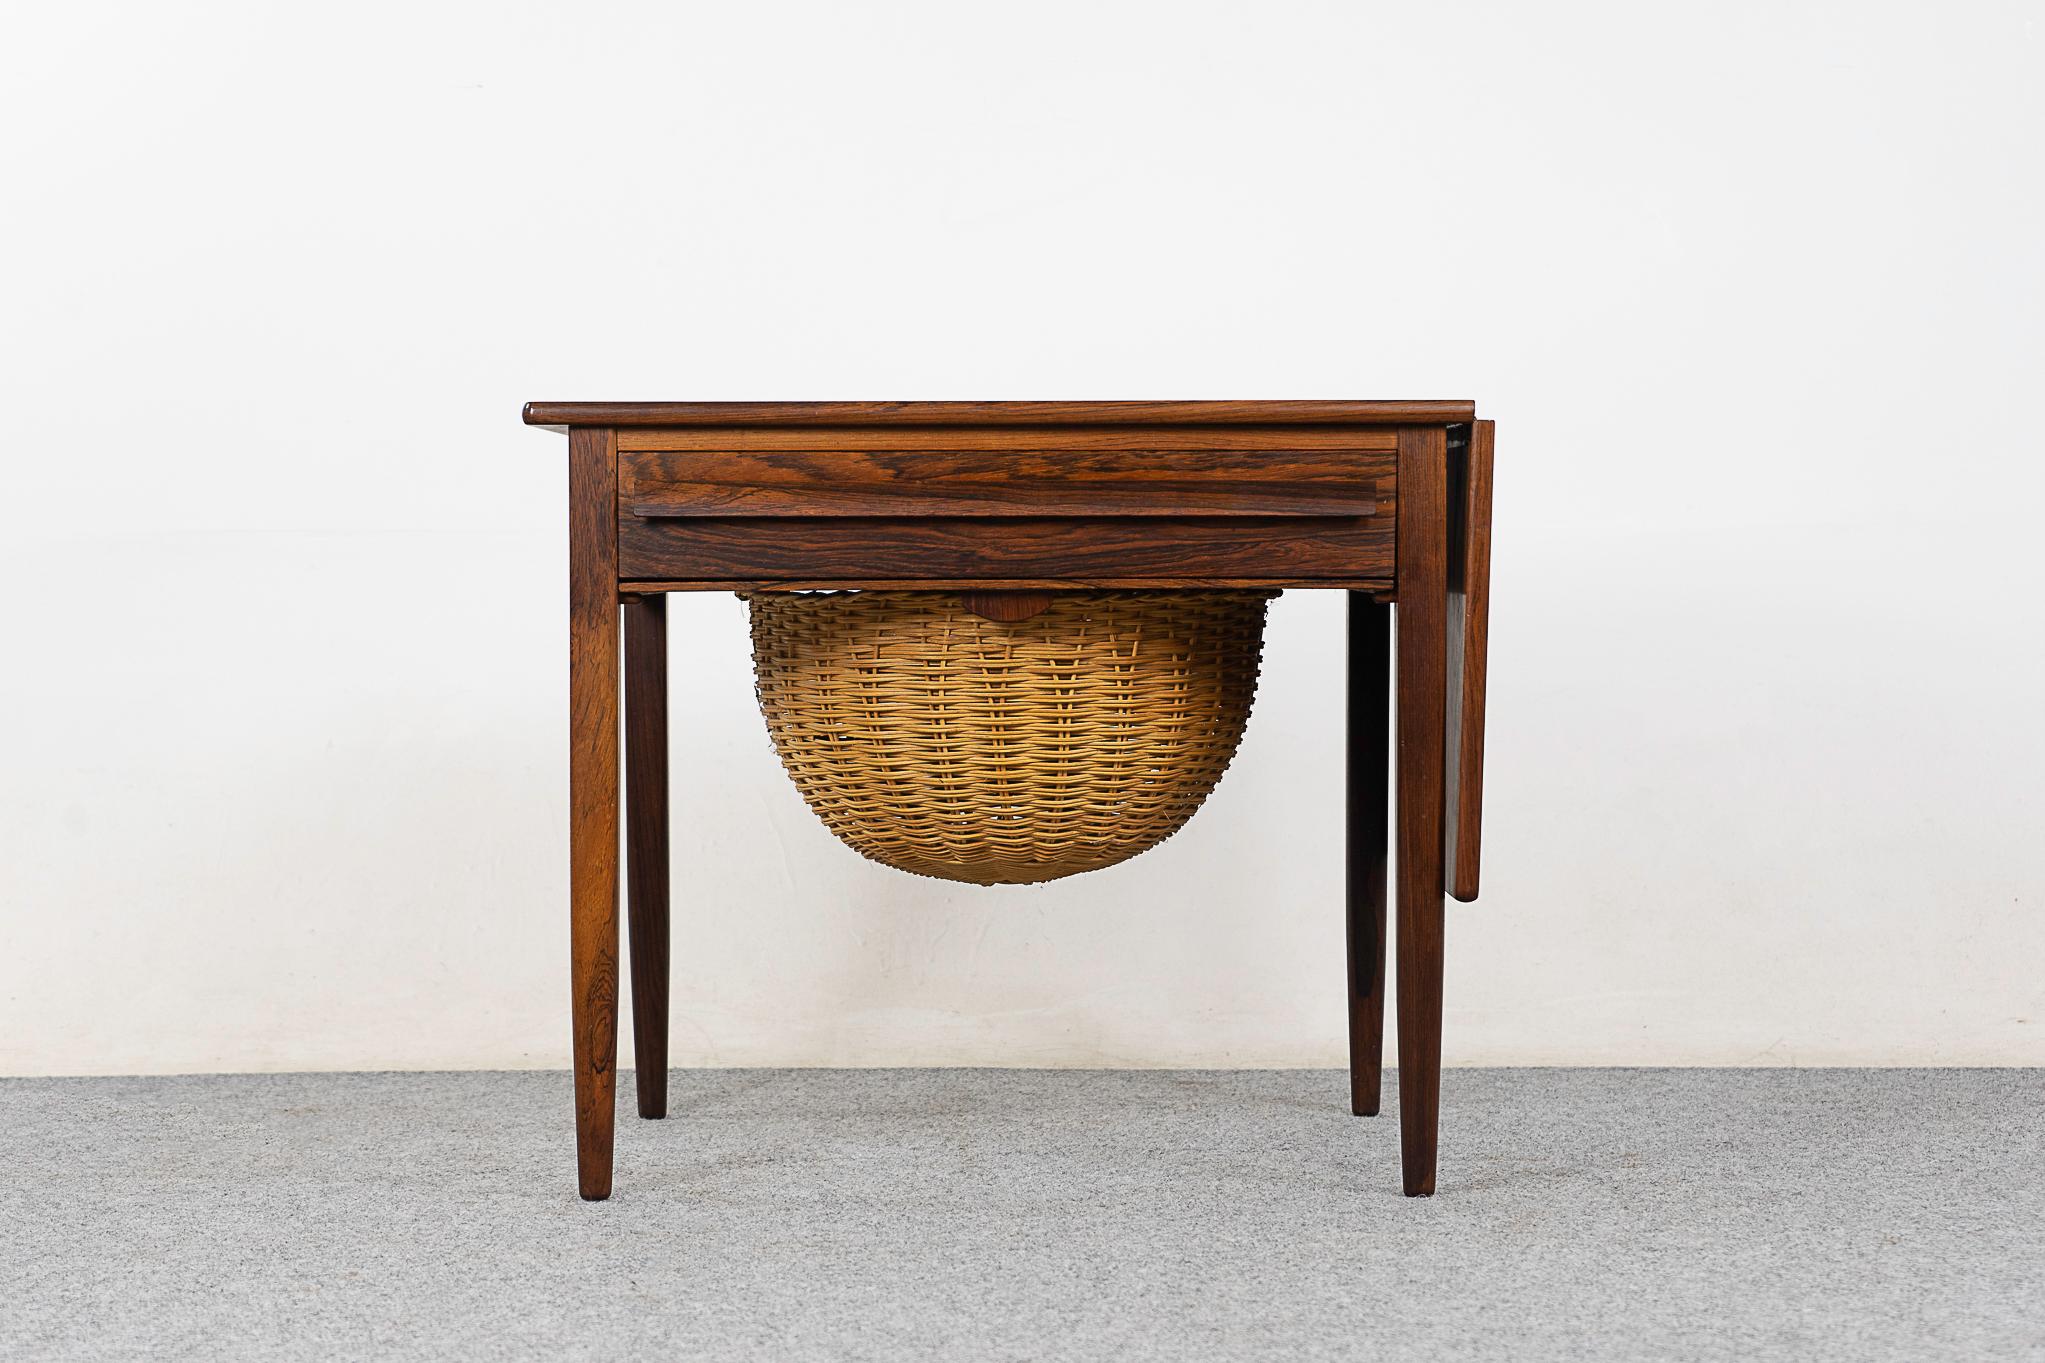 Rosewood sewing table by Johannes Andersen, circa 1960's. Sweet sewing table, can double as a perfect end table or accent piece. Handy drawer with fitted interior, original woven basket sides out for sleek storage.

Unrestored item, some marks